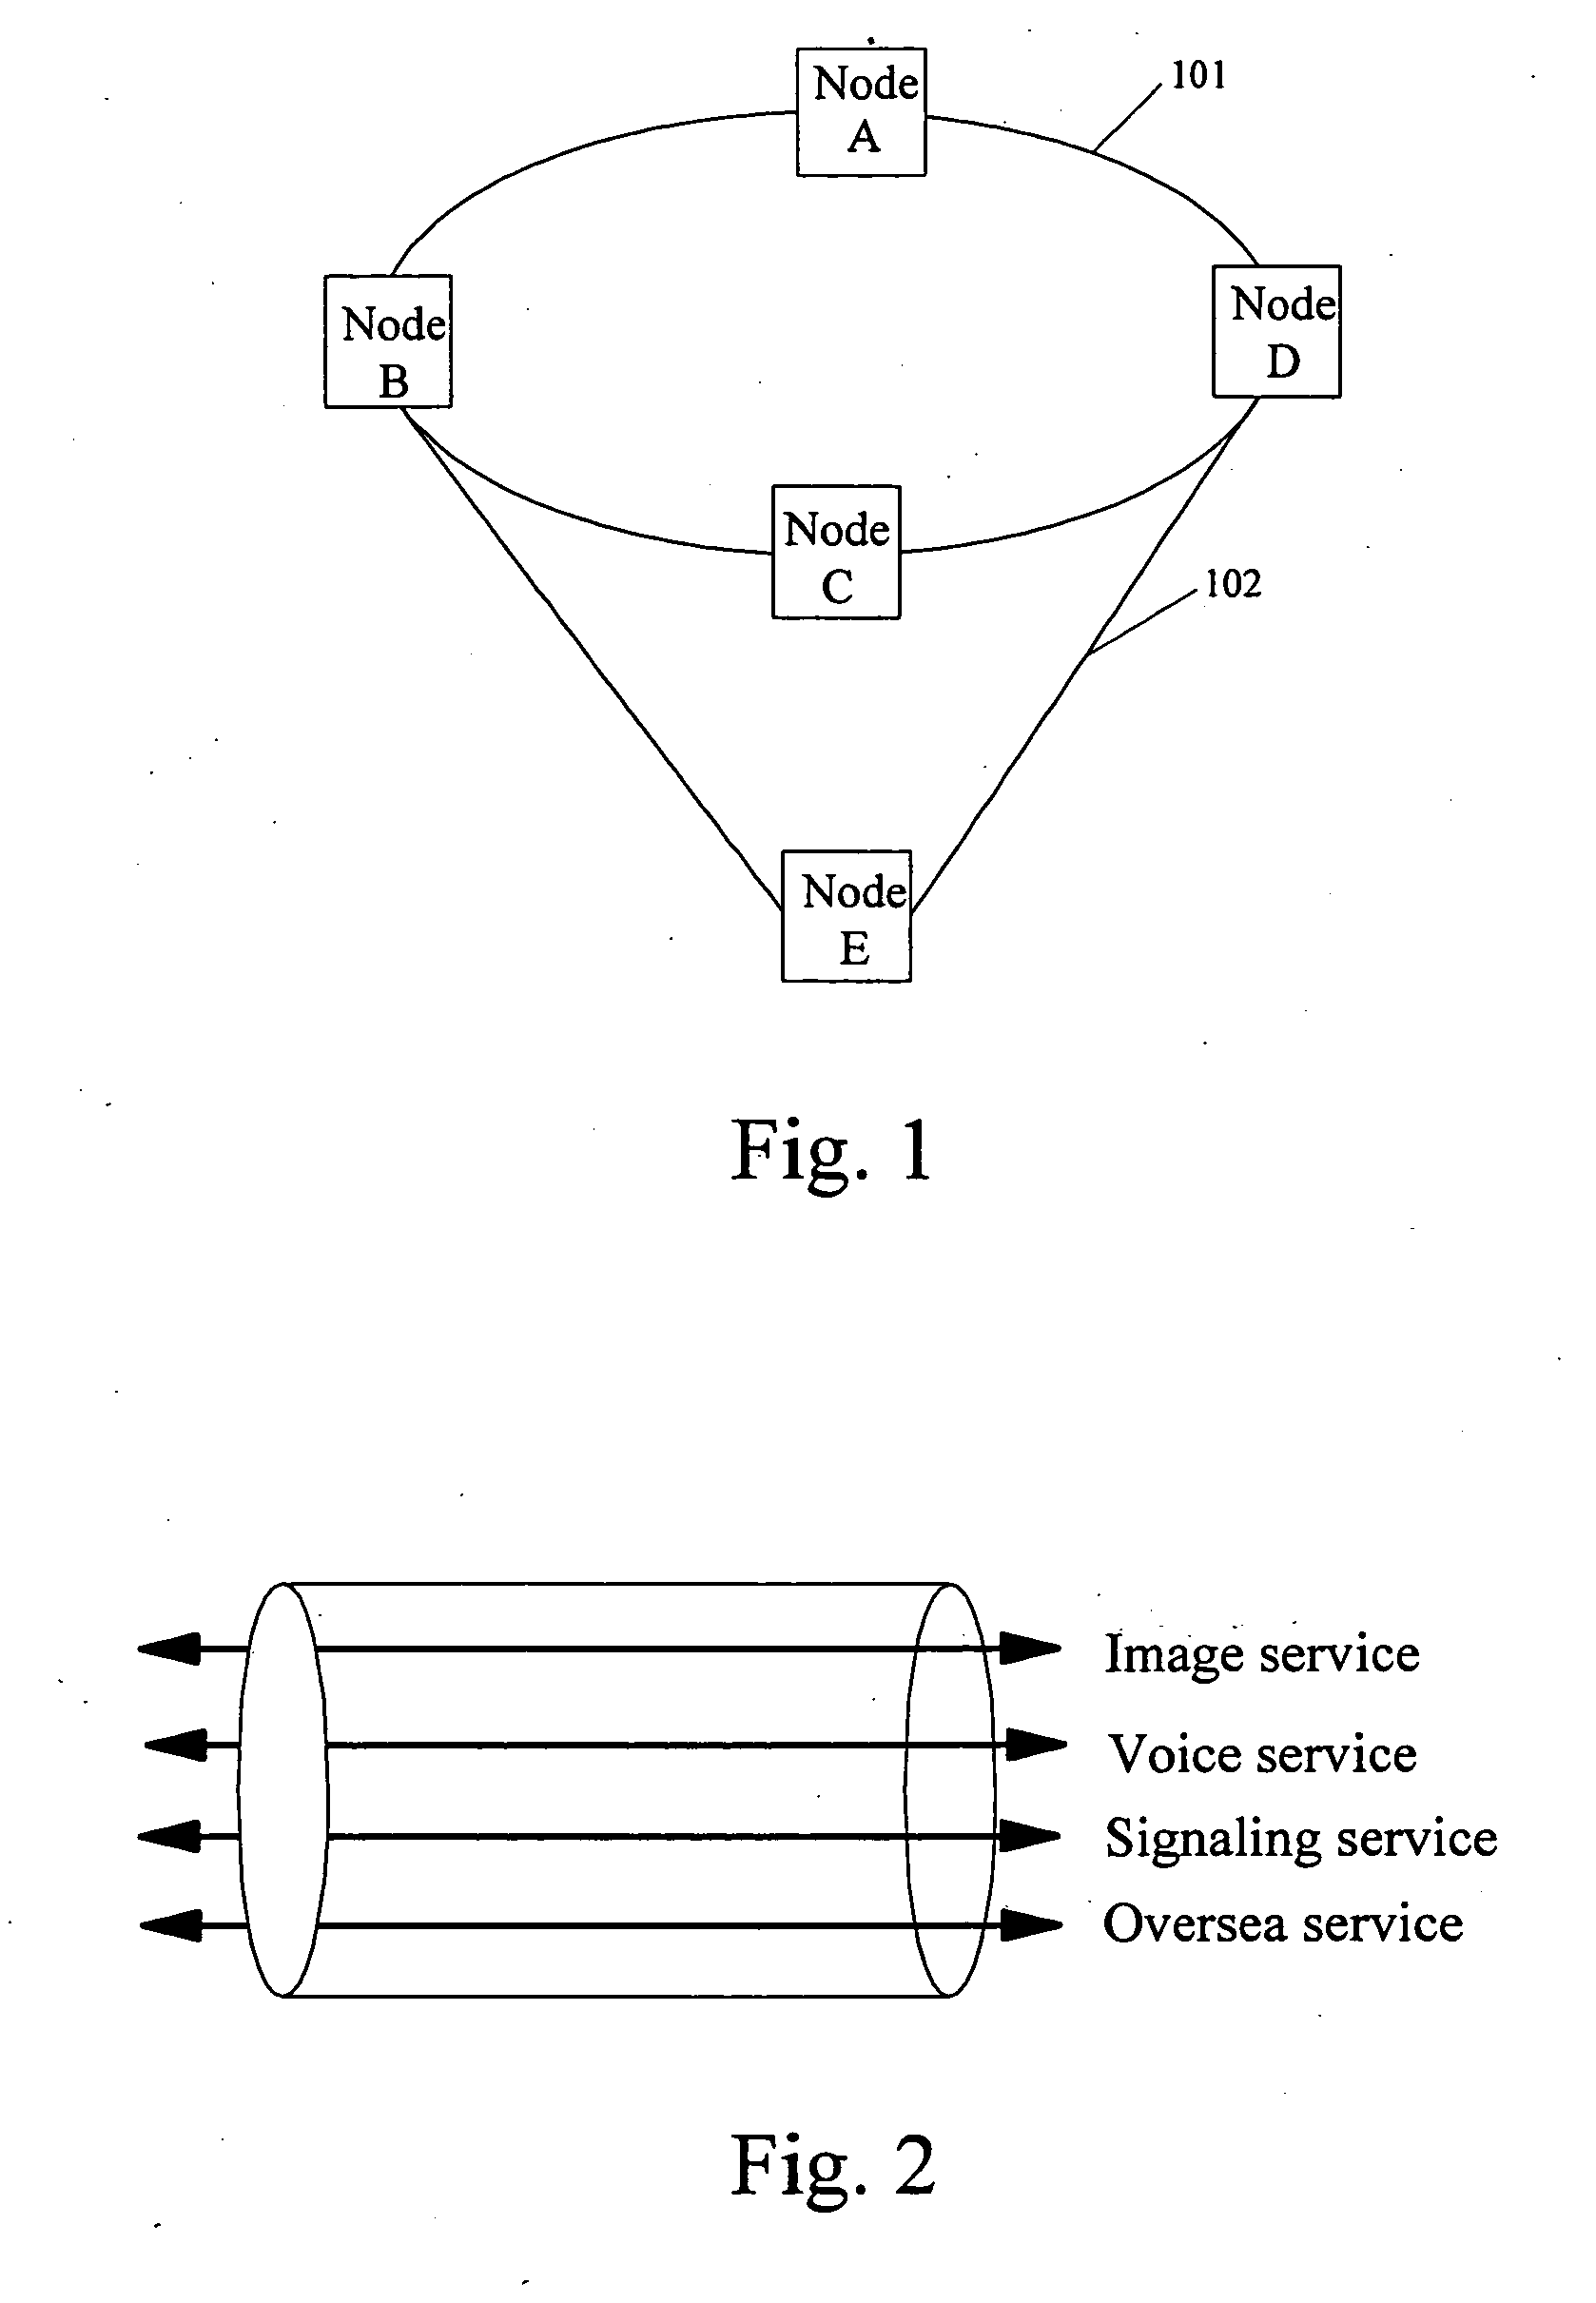 Virtual protection method and device for fiber path